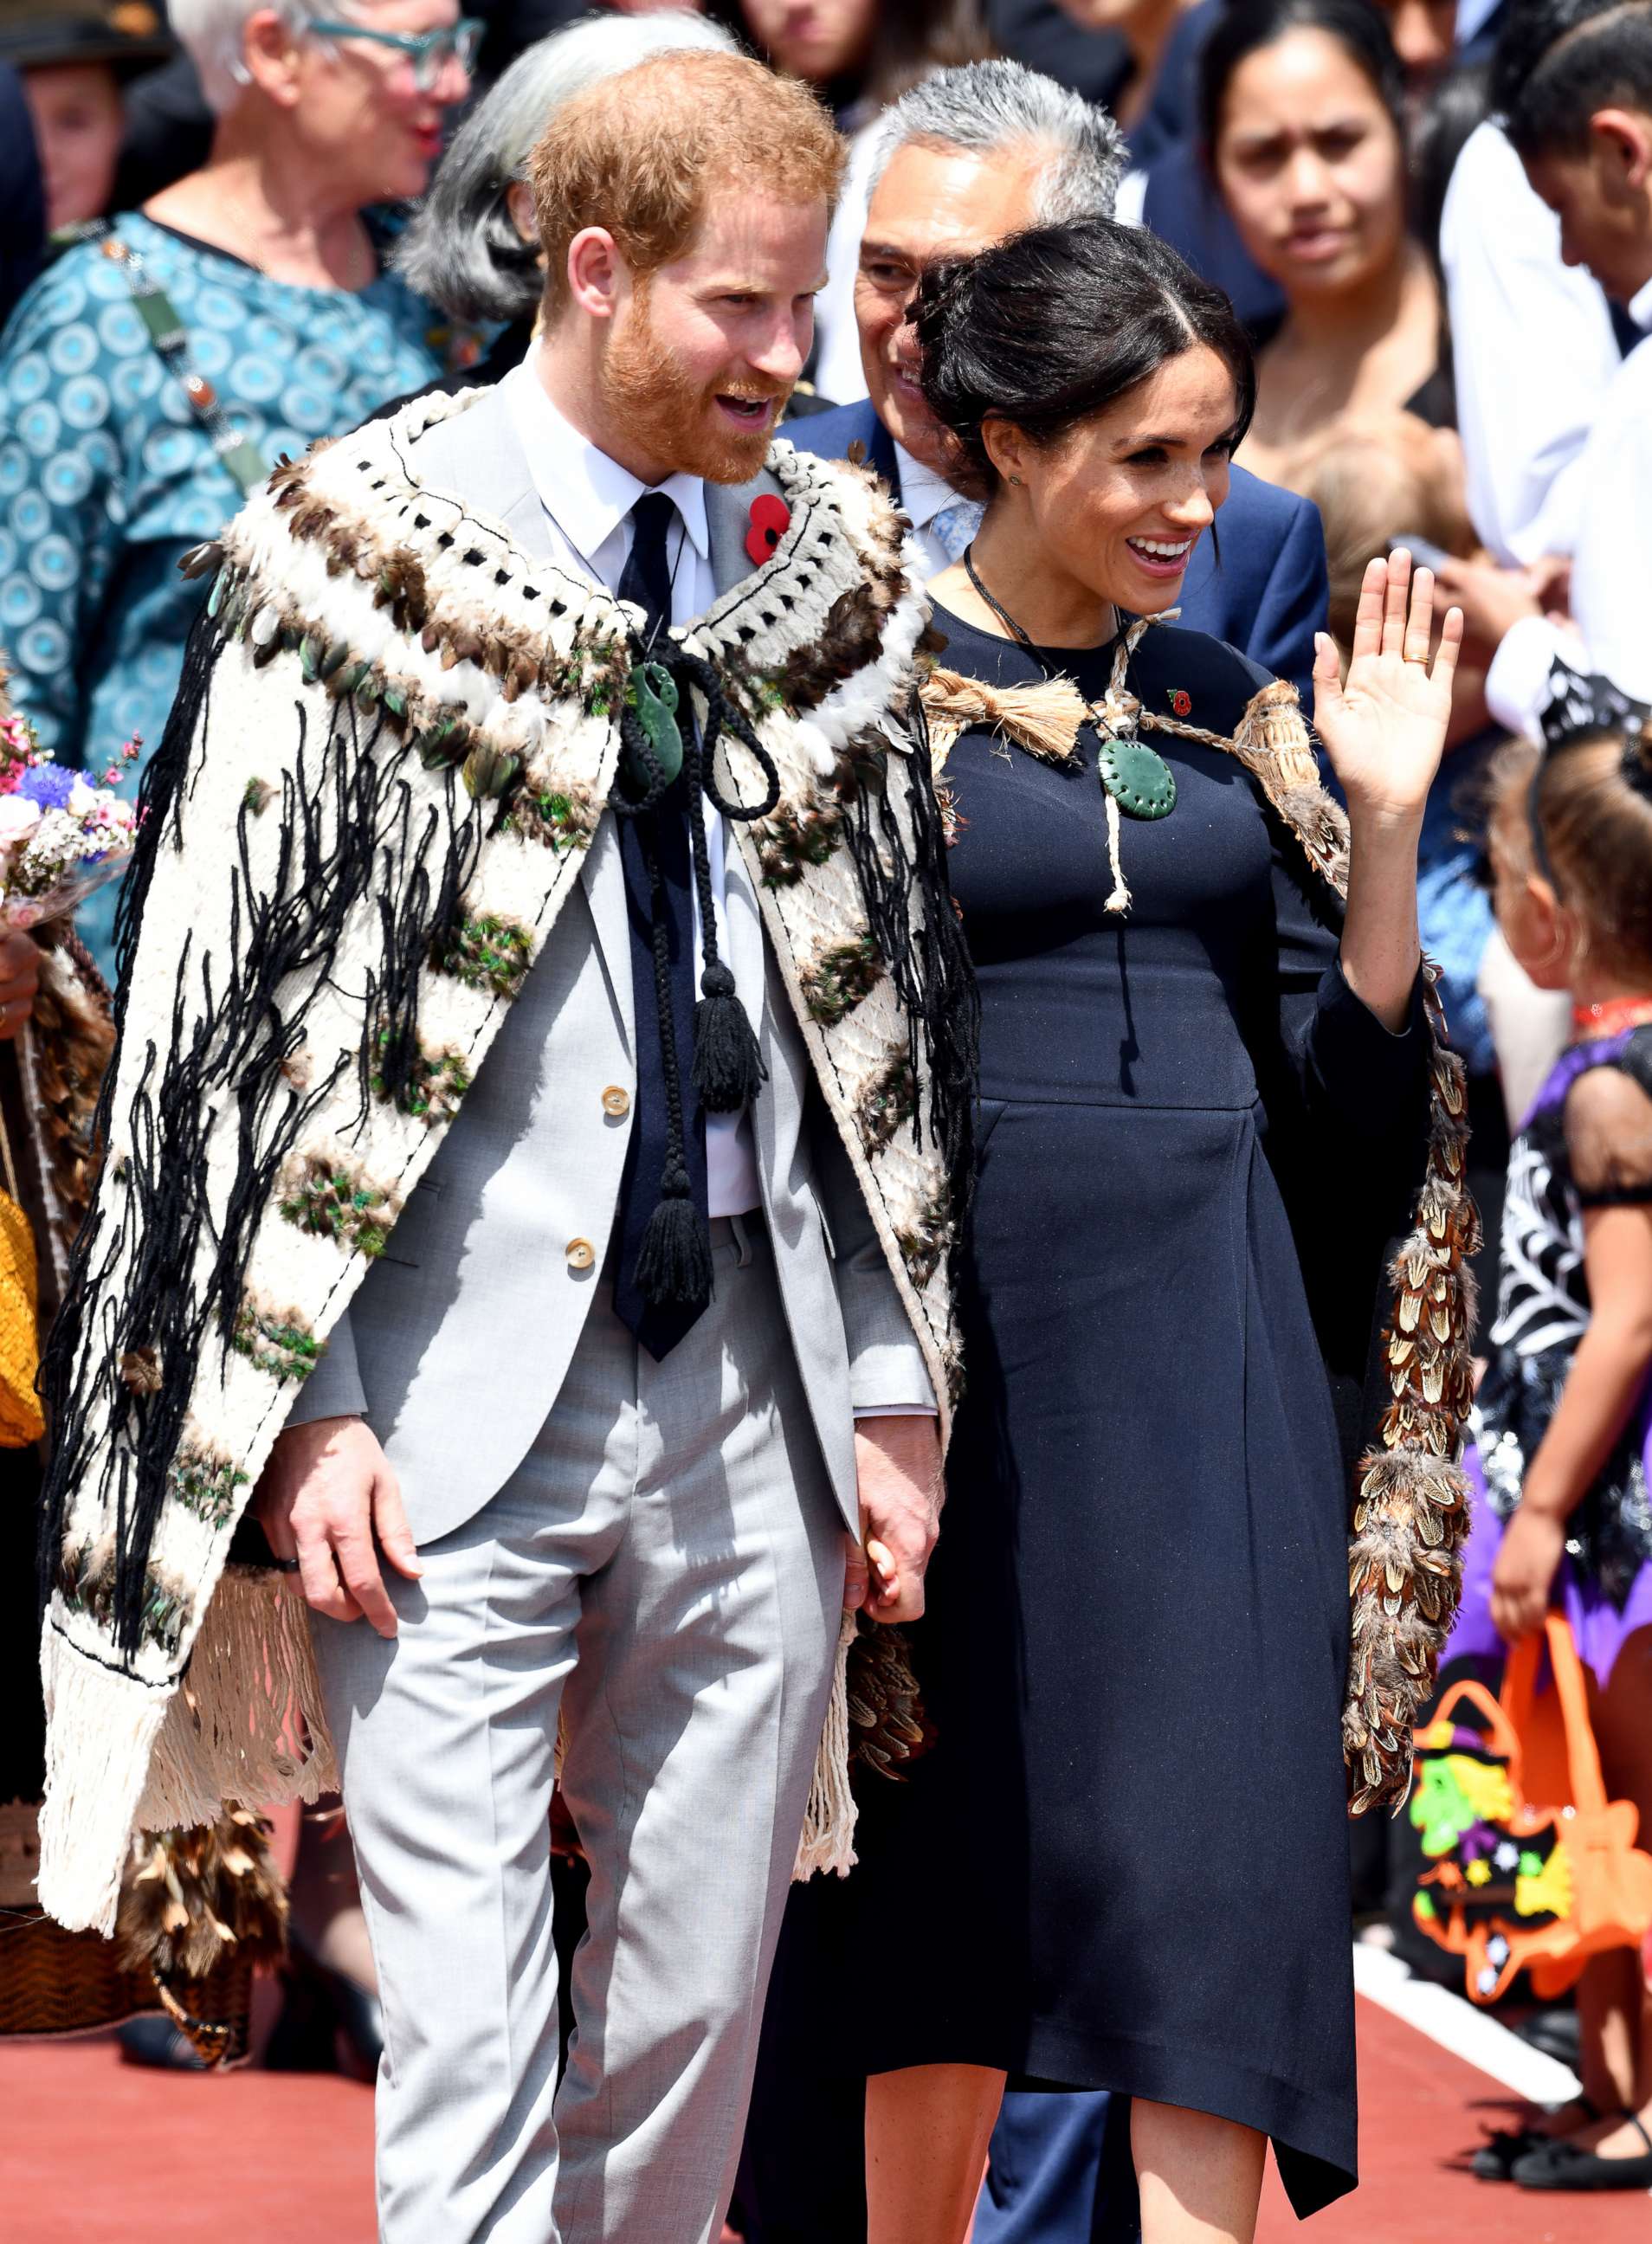 PHOTO: Prince Harry and Meghan Markle, The Duke and Duchess of Sussex, Oct 31, 2018,  in Rotorua, New Zealand.